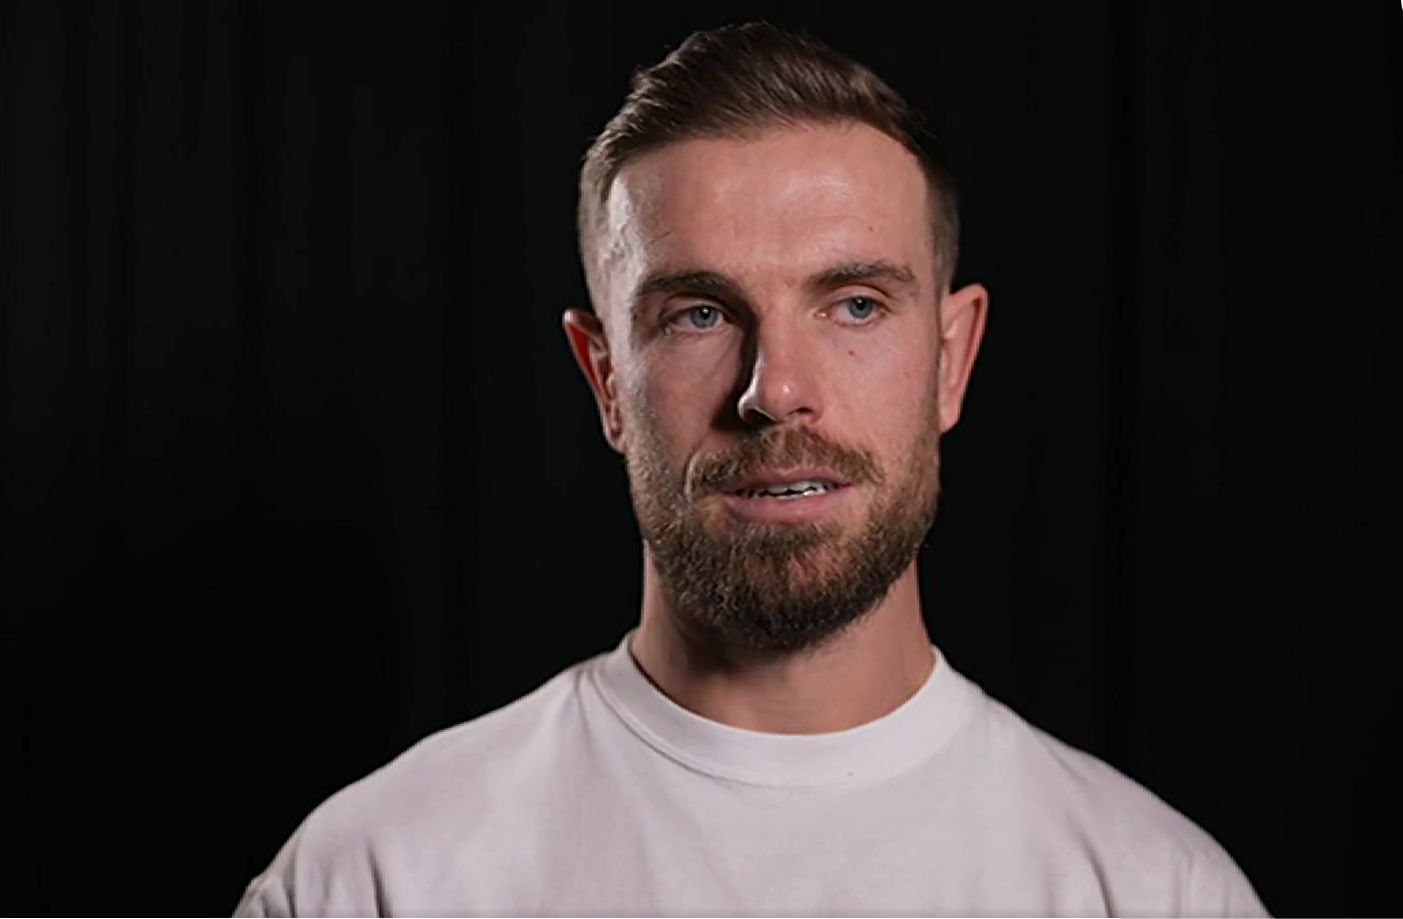 Video: Jordan Henderson admits he has not been good enough to play for Liverpool